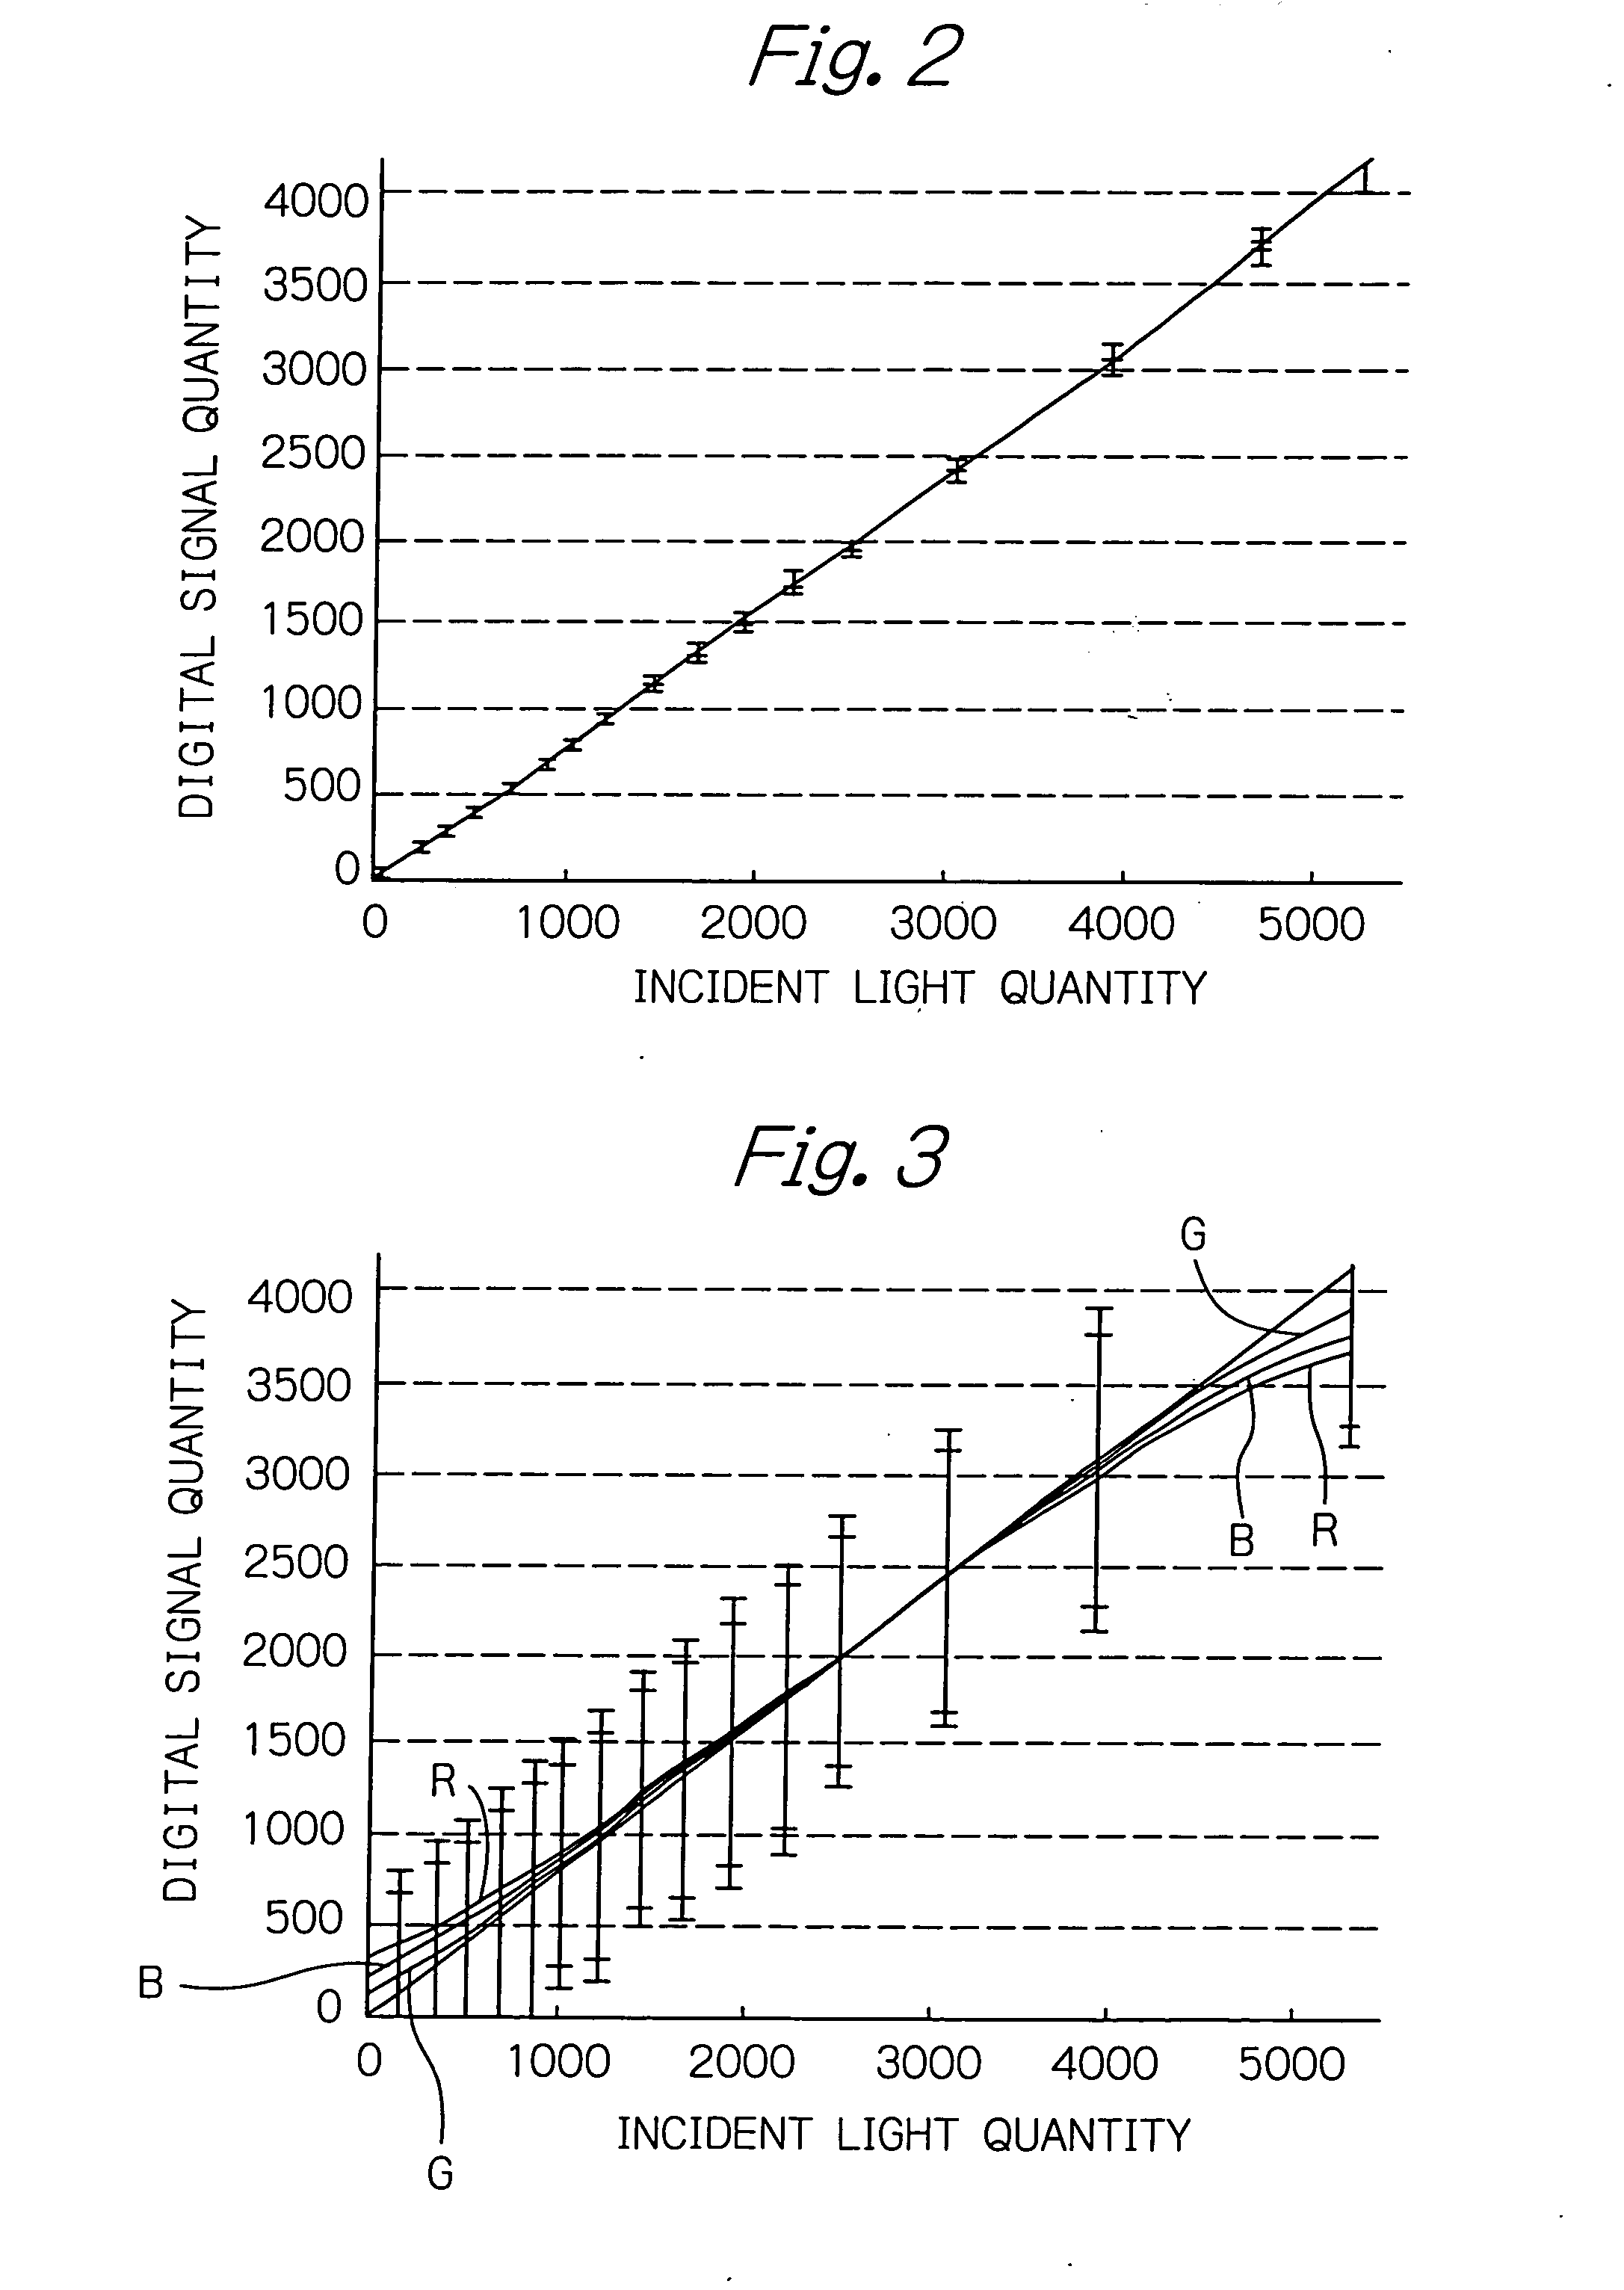 Image pickup apparatus for preventing linearity defect